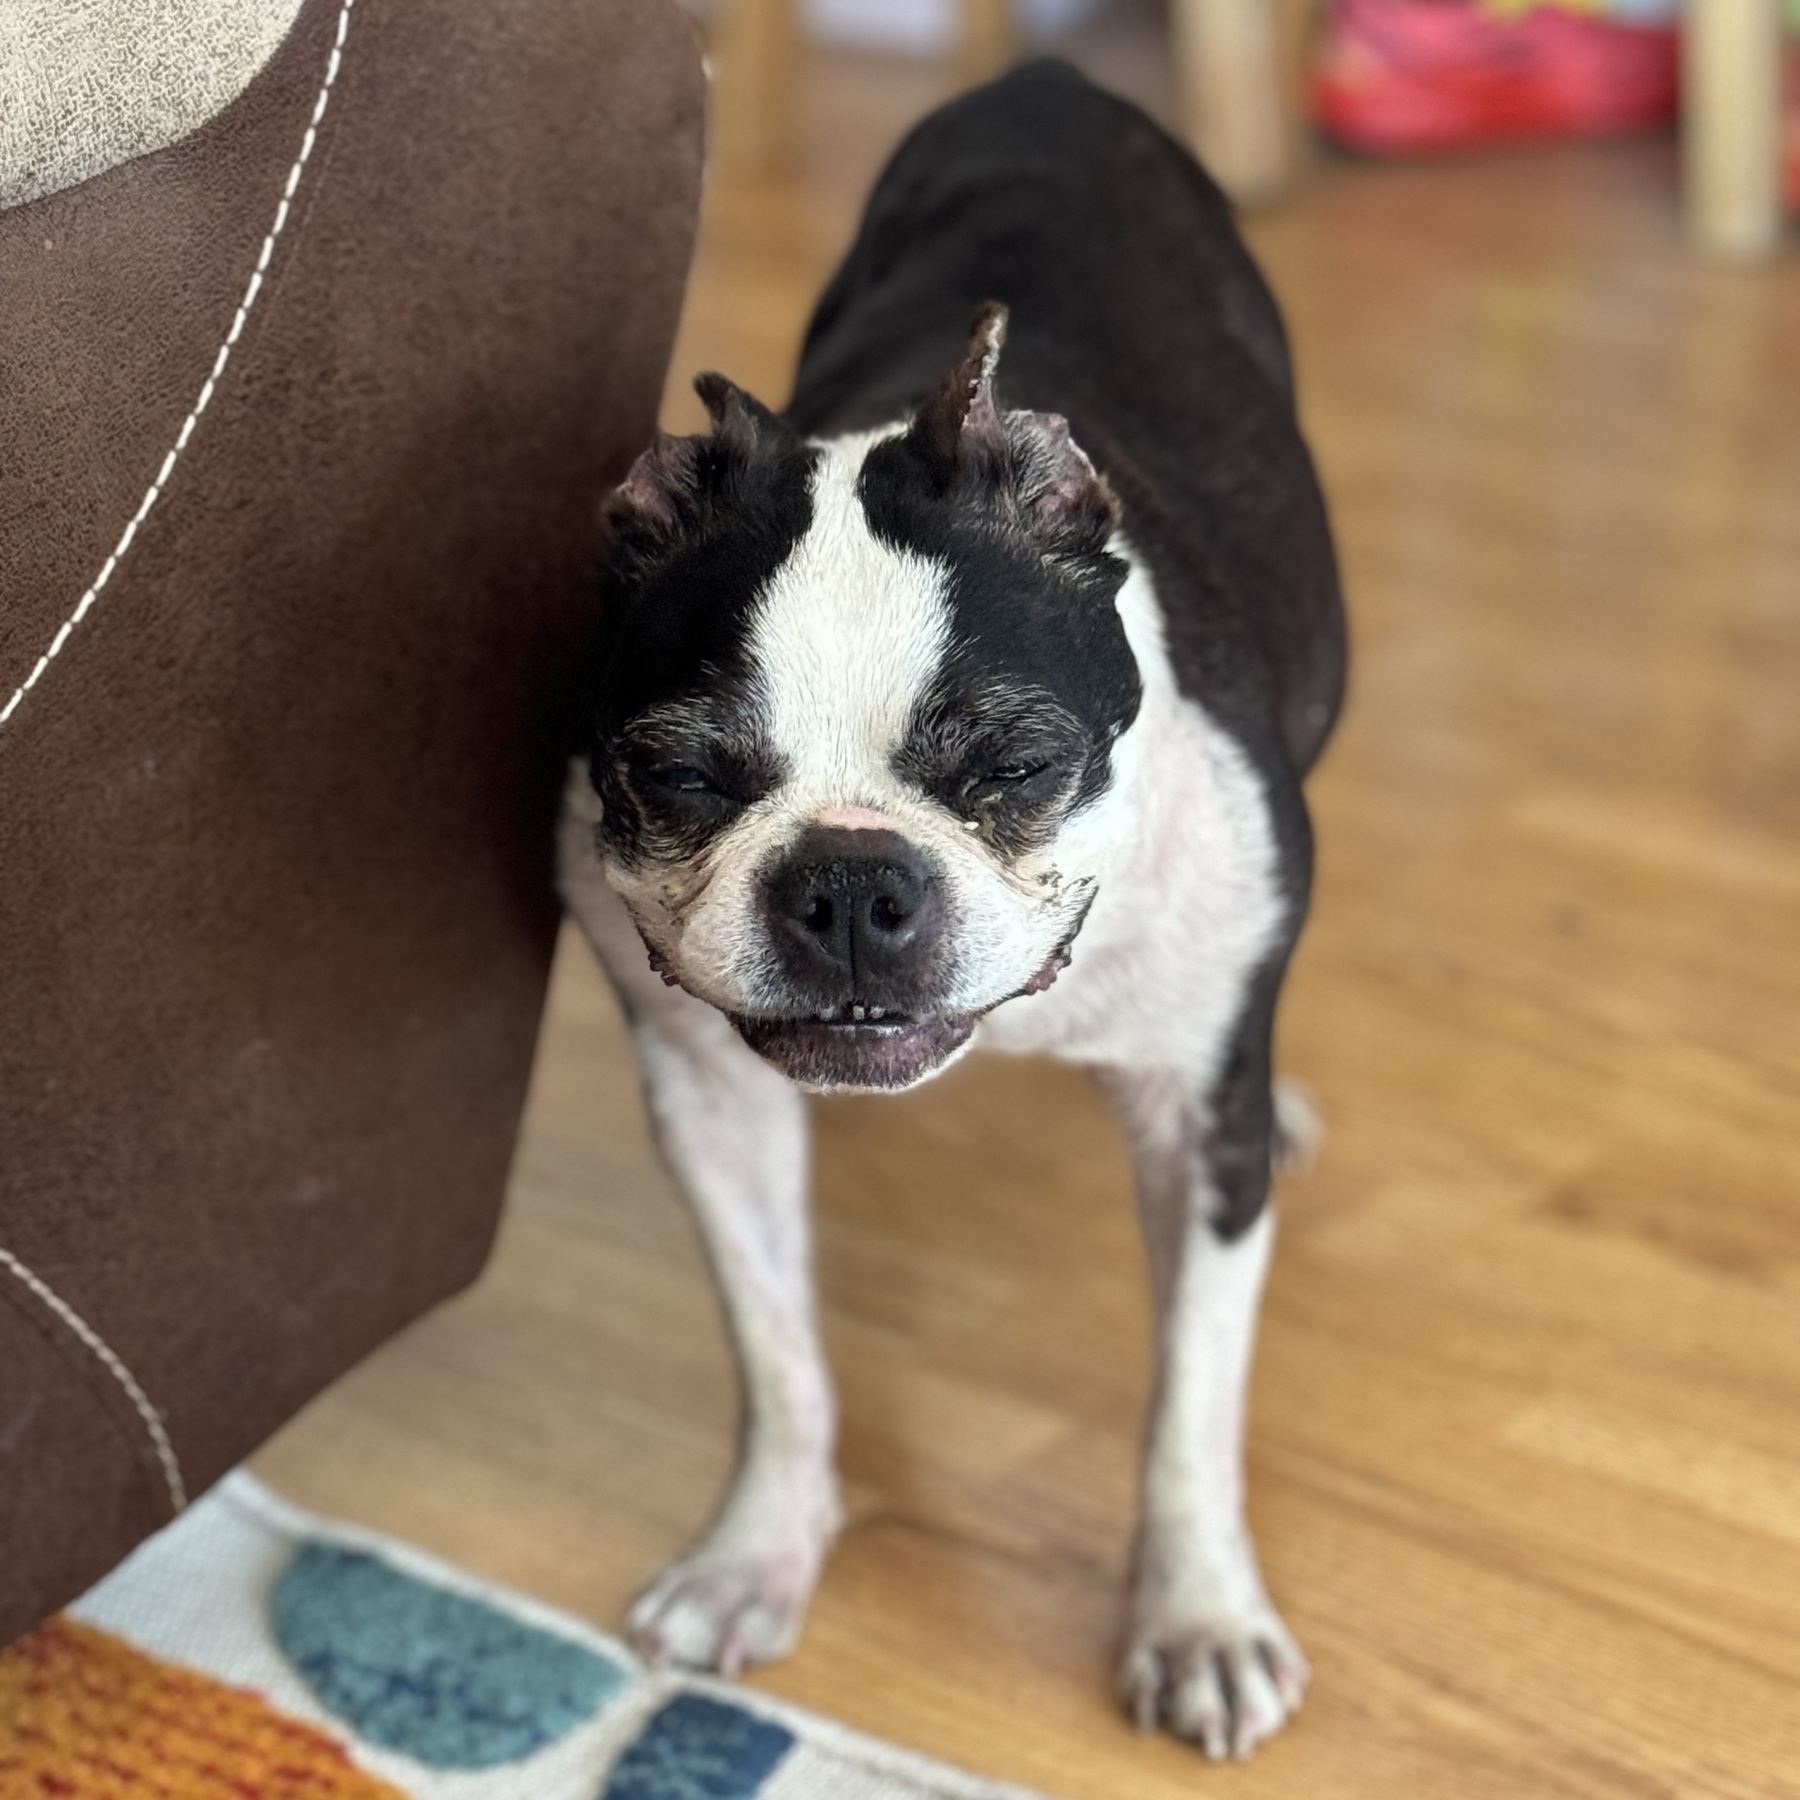 A Boston terrier is panting in the warmth and looks as though she’s laughing. (She just came inside and has plenty of fresh, cool, clean water in a bowl nearby.)